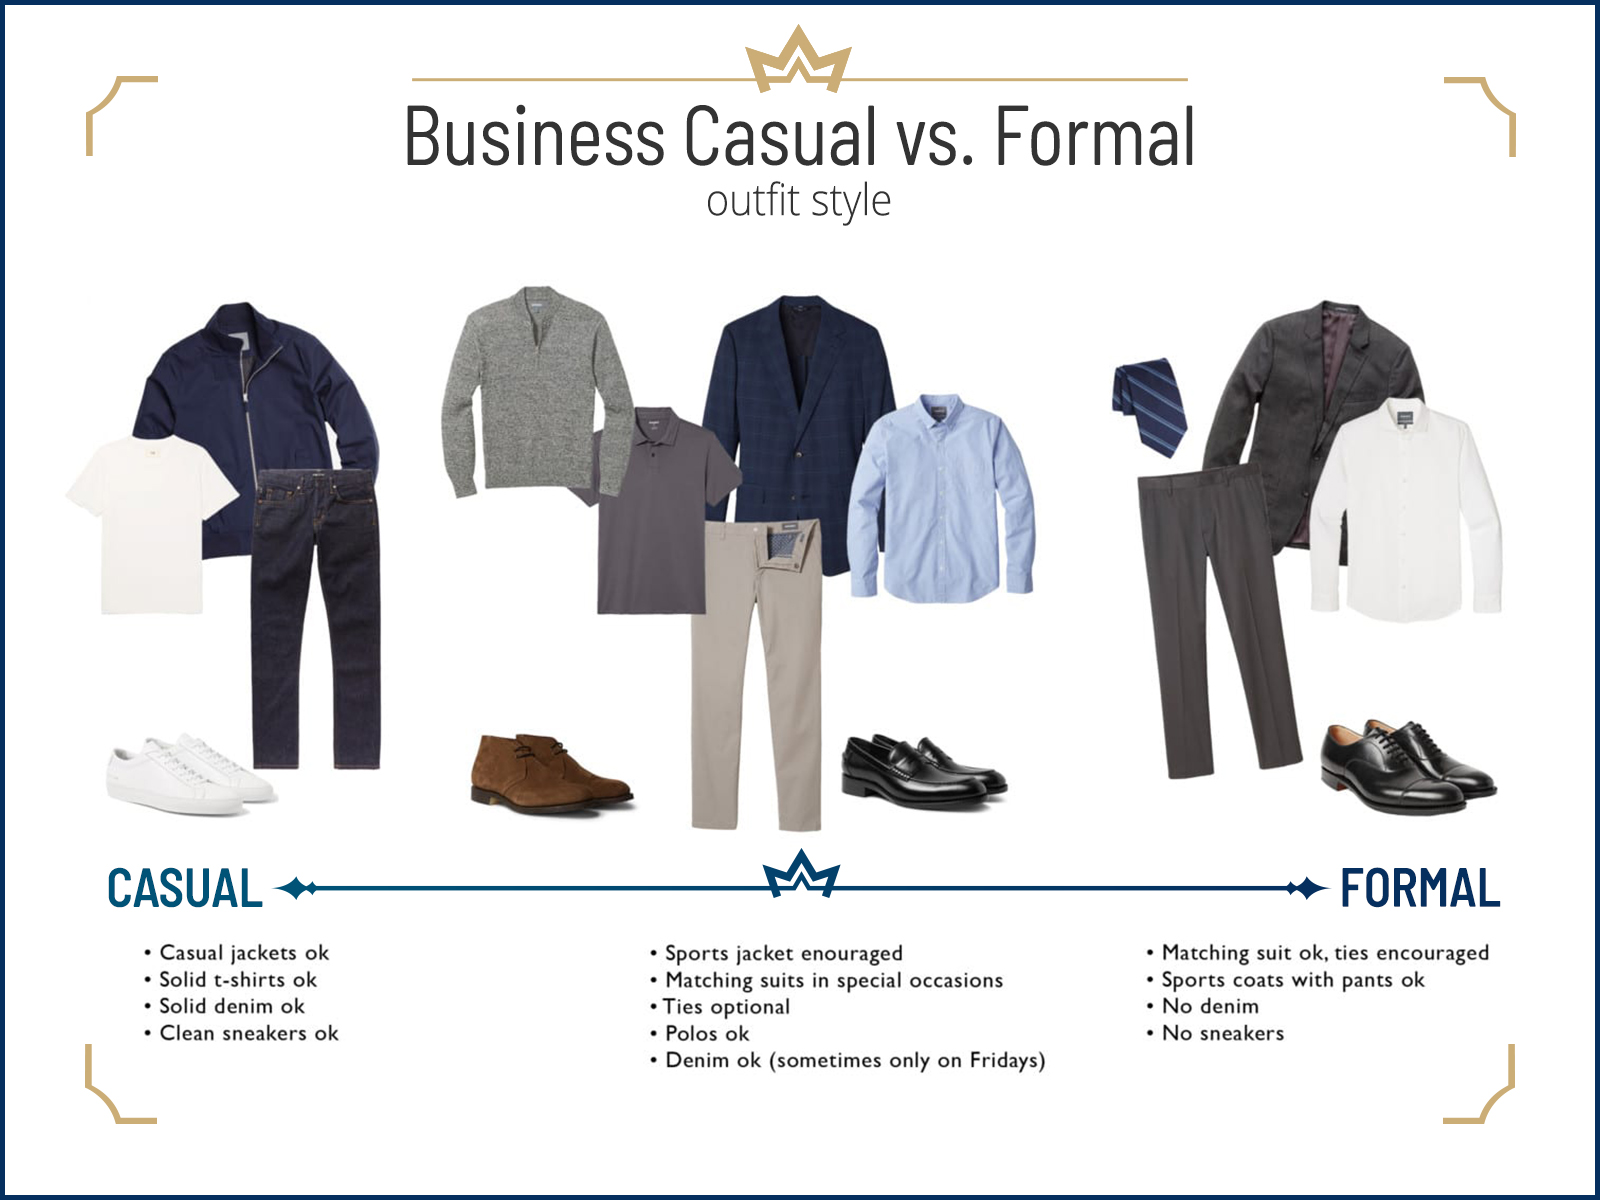 Business-casual vs. business formal outfit styles for men